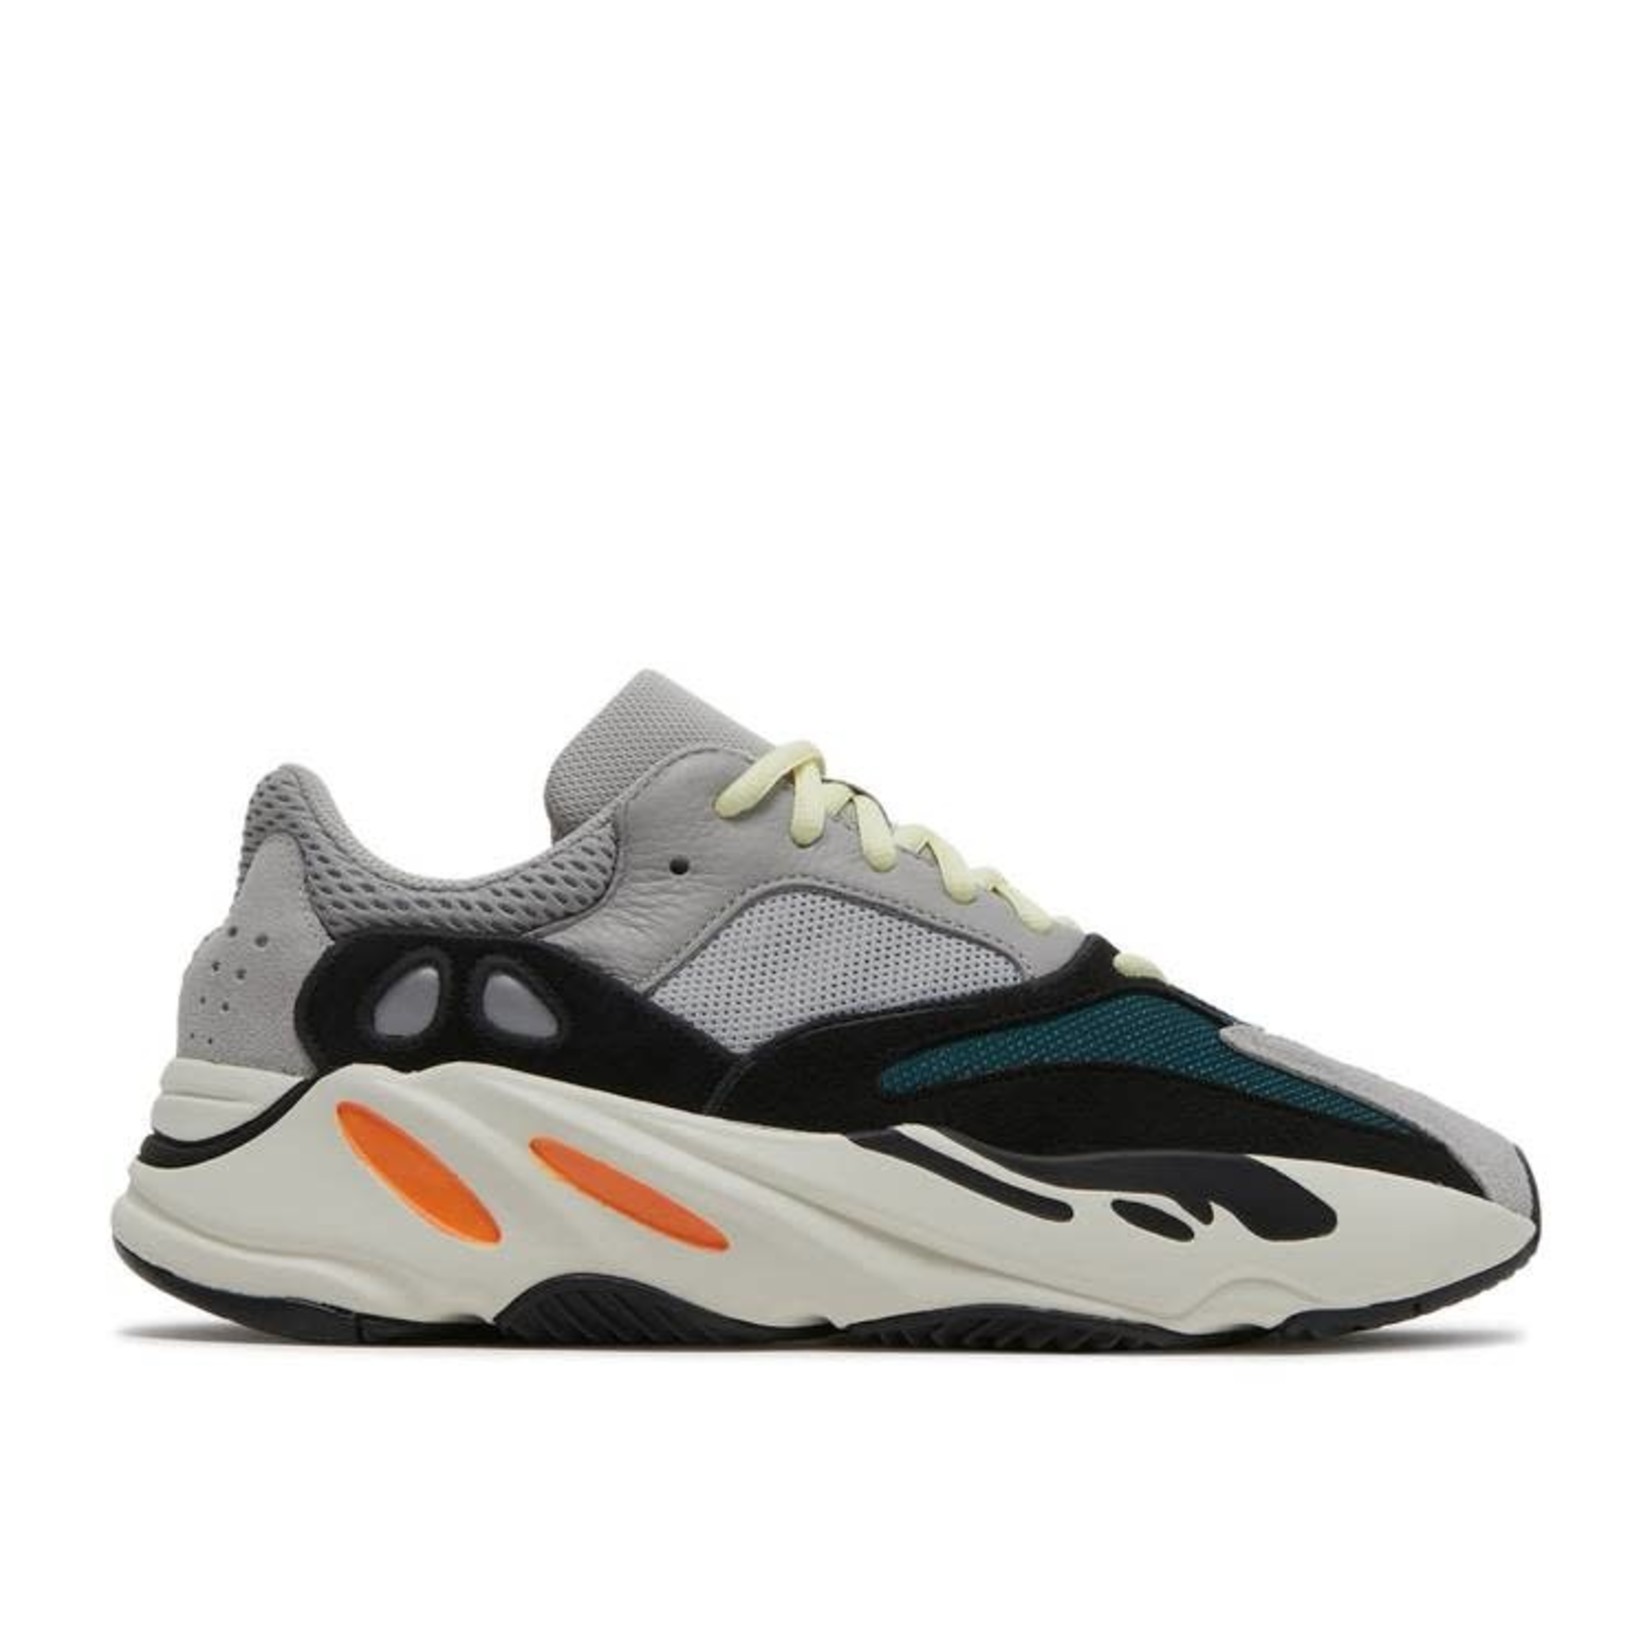 Adidas Adidas Yeezy Boost 700 Wave Runner Size 10, DS BRAND NEW